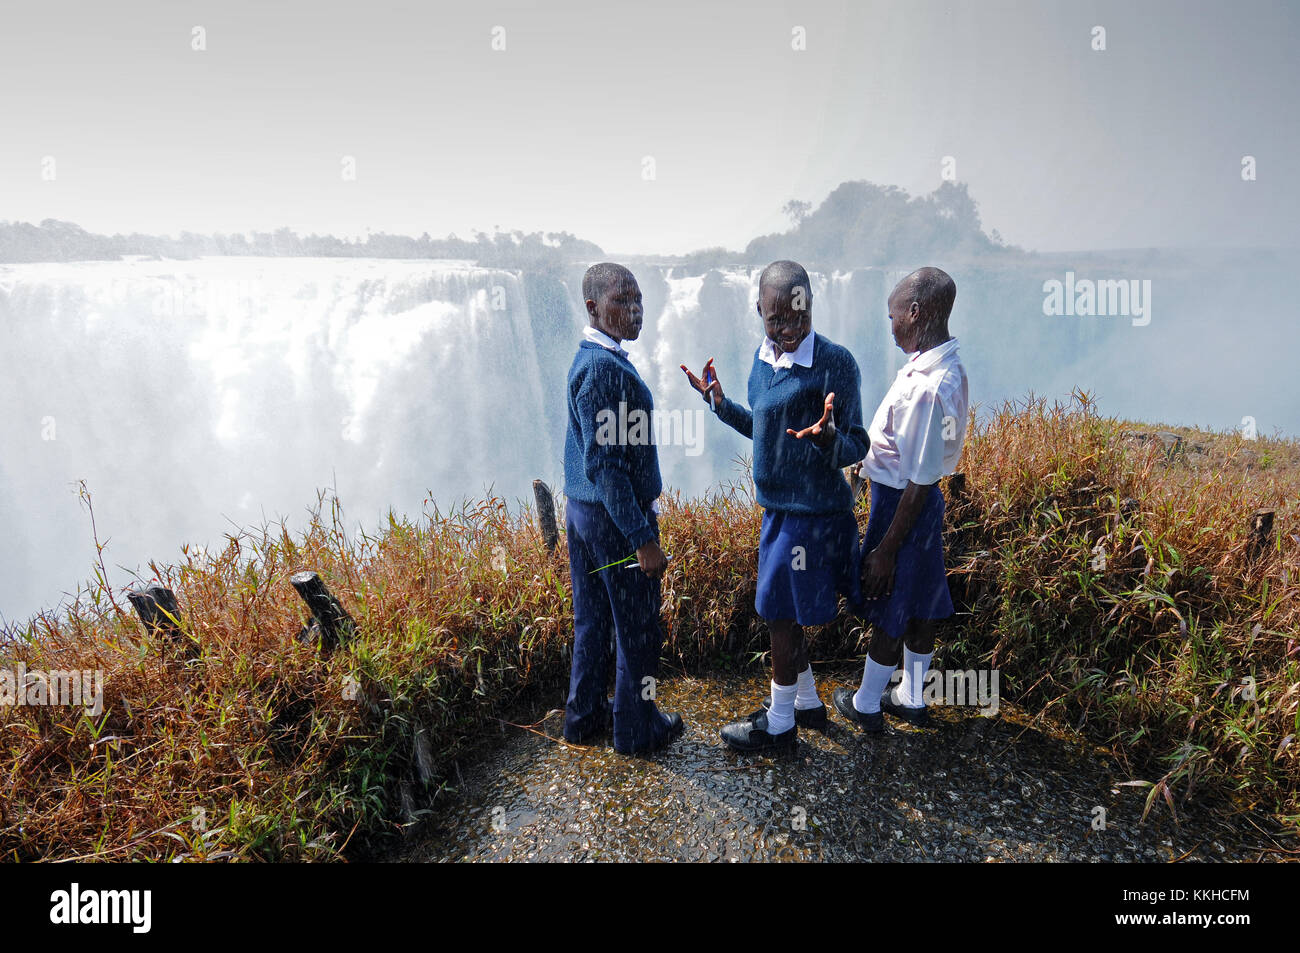 Victoria Falls, Zimbabwe. 30th July, 2015. Spray from the Victoria Falls rains down on a group of school children, pictured on 30.07.2015. The Victoria Falls are the broad waterfalls of the Zambezi at the border between Zimbabwe and Zambia. The falls were discovered by Scottish missionary David Livingstone, who named them in honour of Britain's Queen Victoria. The Victoria Falls have been a UNESCO world heritage site since 1989. The water falls up to 110 metres across a breadth of more than 1,700 metres. Credit: Matthias Tödt | usage worldwide/dpa/Alamy Live News Stock Photo